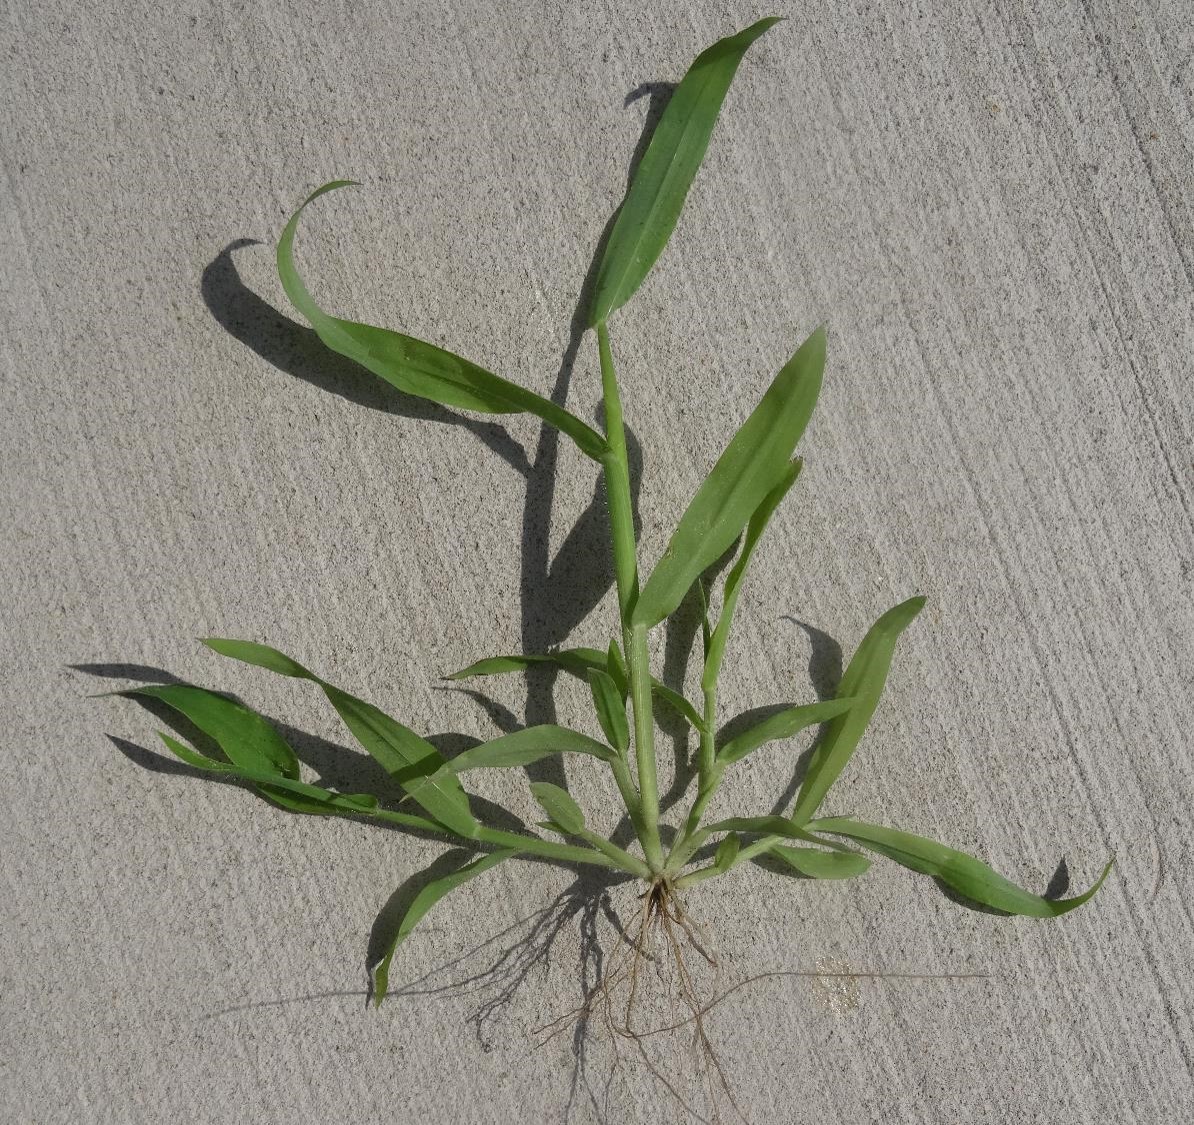 a crabgrass plant with multiple stems